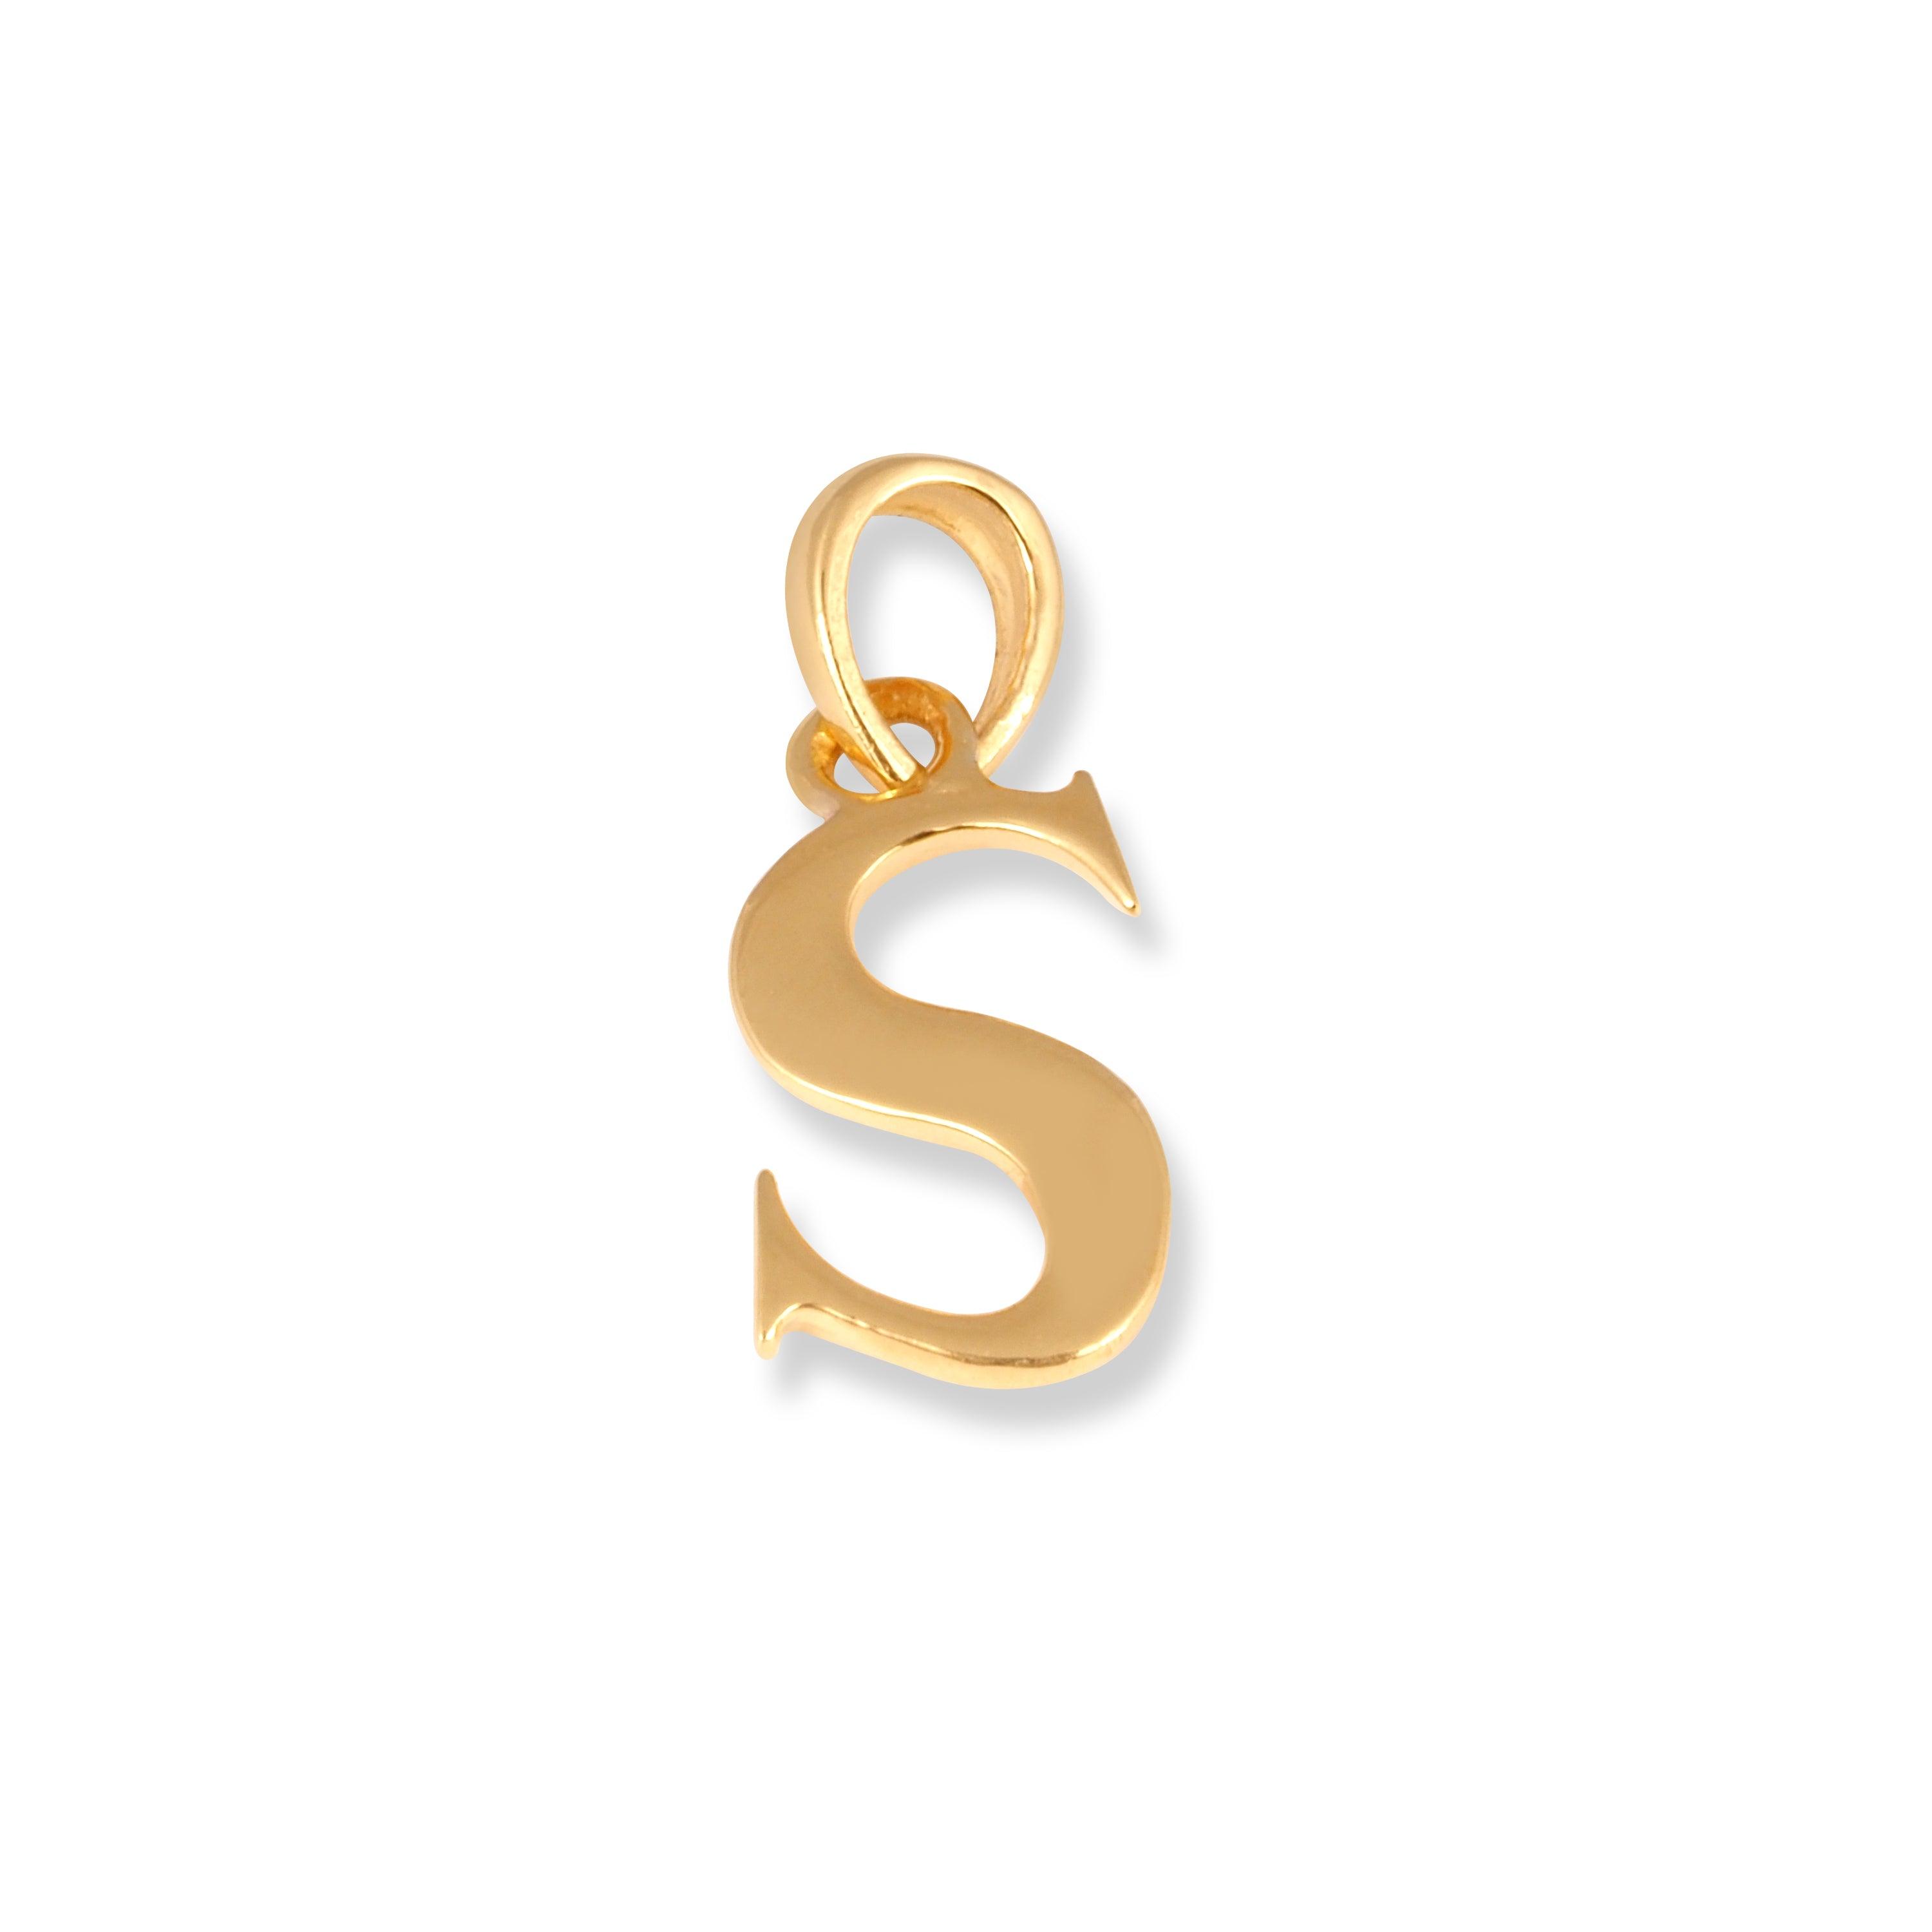 22ct Gold 'S' Initial Pendant P-7049-S - Minar Jewellers